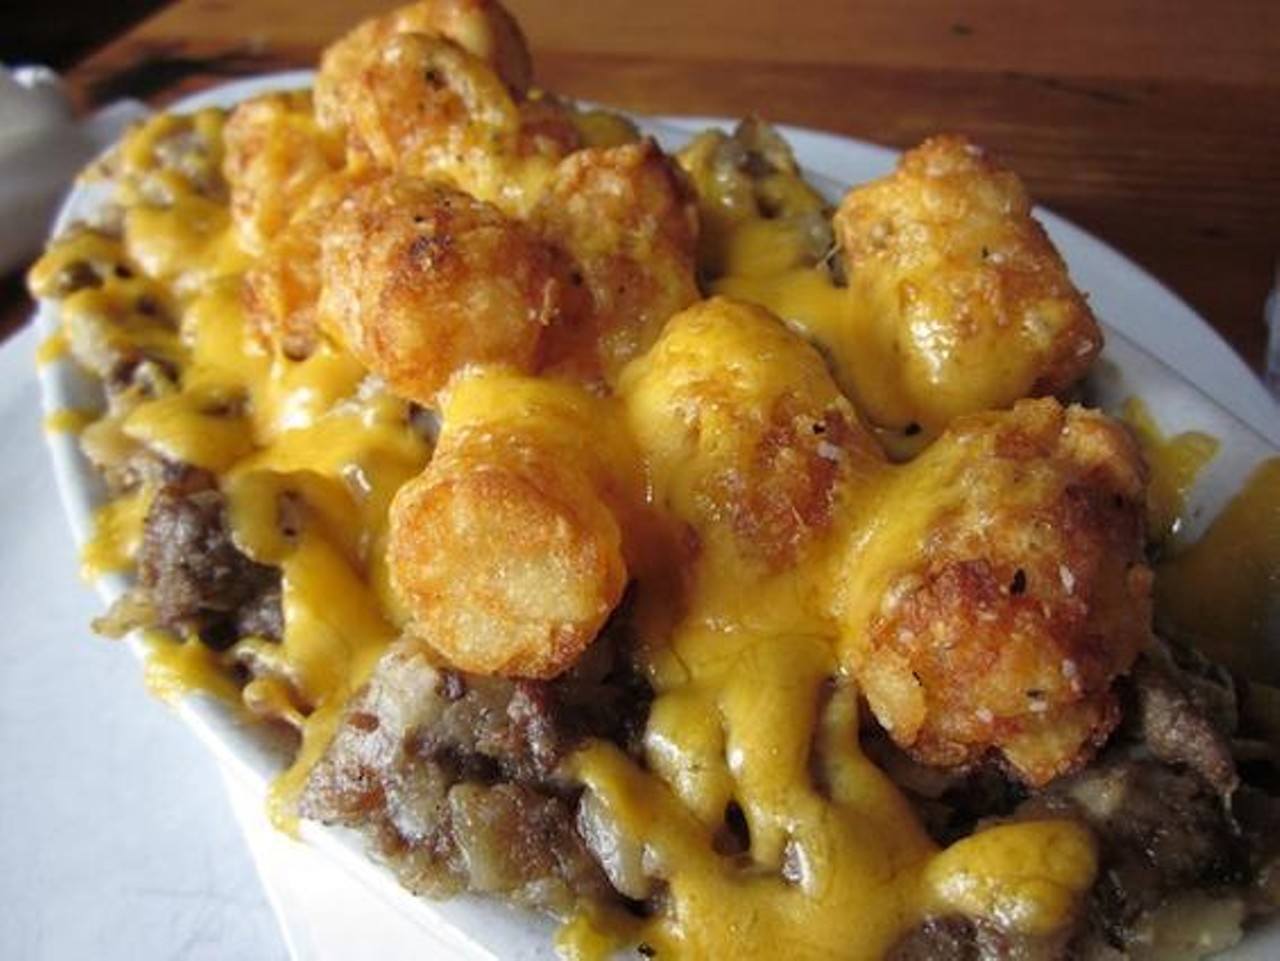 Say goodbye to your hangover and hello to the tater tot casserole, featuring baked beef and cheddar at Zayda Buddy's Pizza in Seattle, Washington.